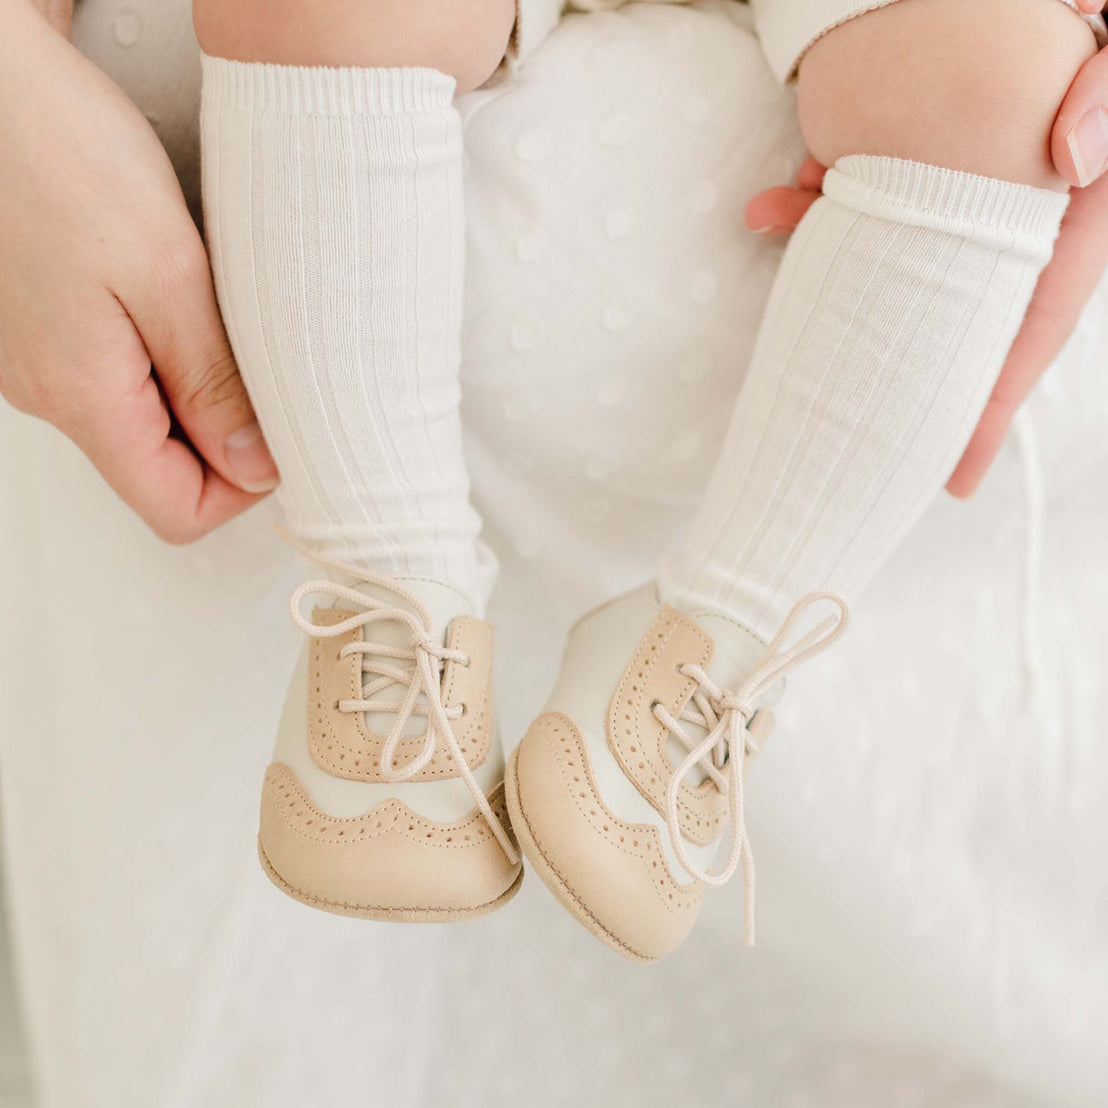 Baby wearing a ribbed knee-high socks and a pair of the Beige and Ivory Wingtip Shoes made with a tan and ivory matte leather with tan suede soles and detailed edging